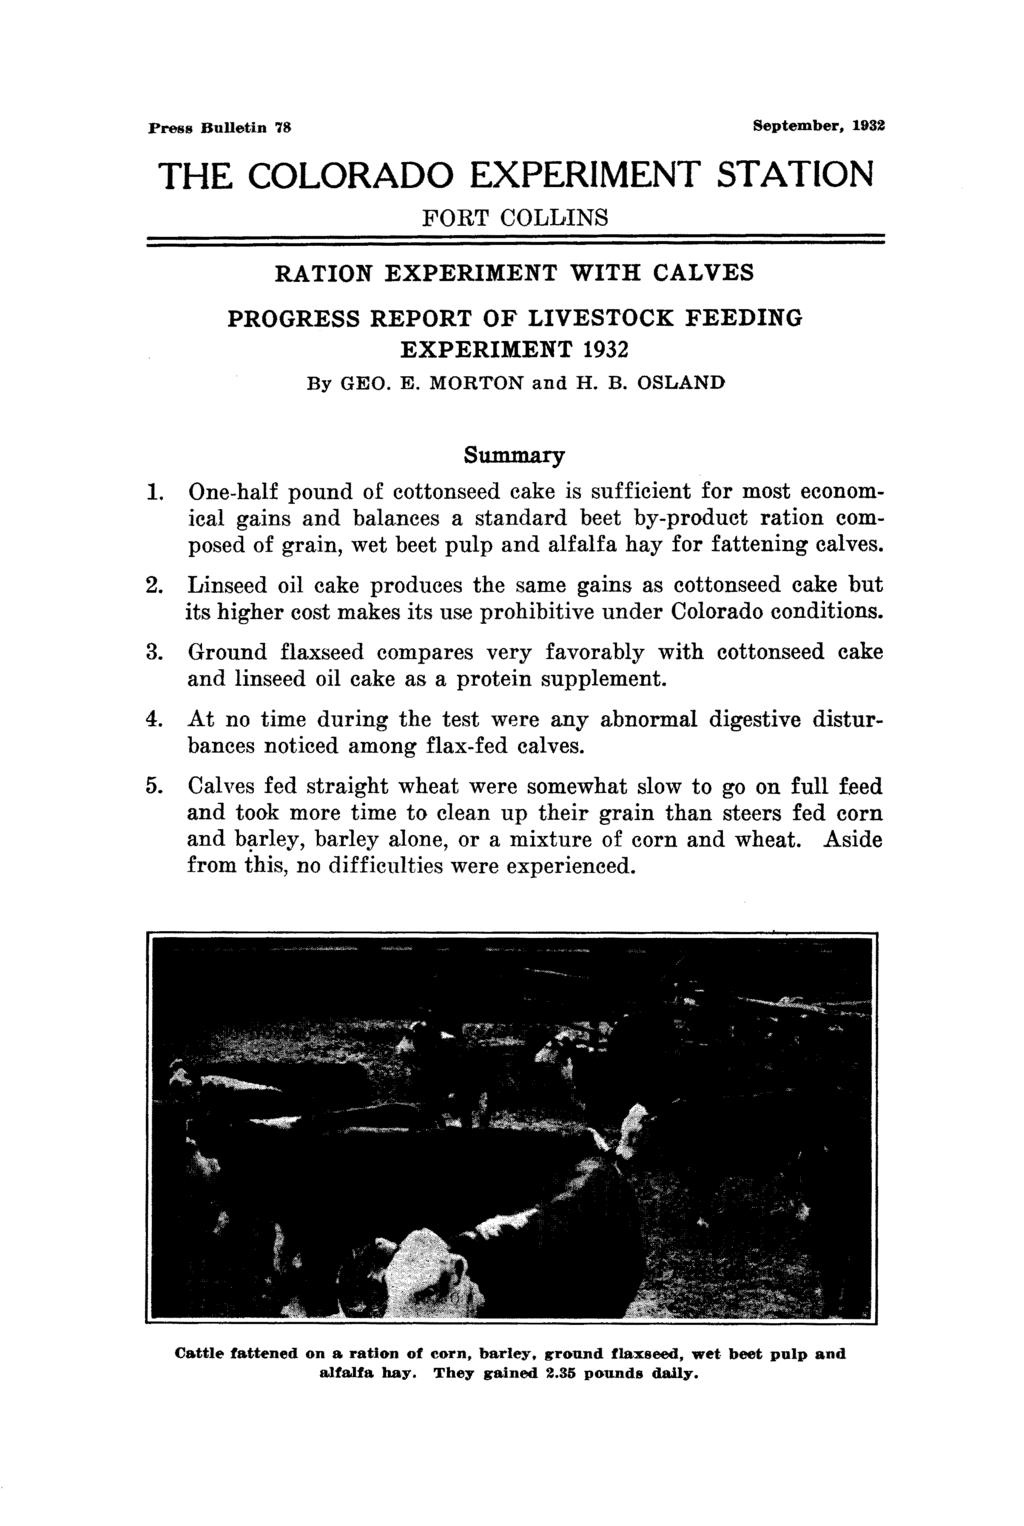 Press Bulletin 78 September, 1932 THE COLORADO EXPERIMENT STATION FORT COLLINS RATION EXPERIMENT WITH CALVES PROGRESS REPORT OF LIVESTOCK FEEDING EXPERIMENT 1932 By GEO. E. MORTON and H. B. OSLAND Summary 1.